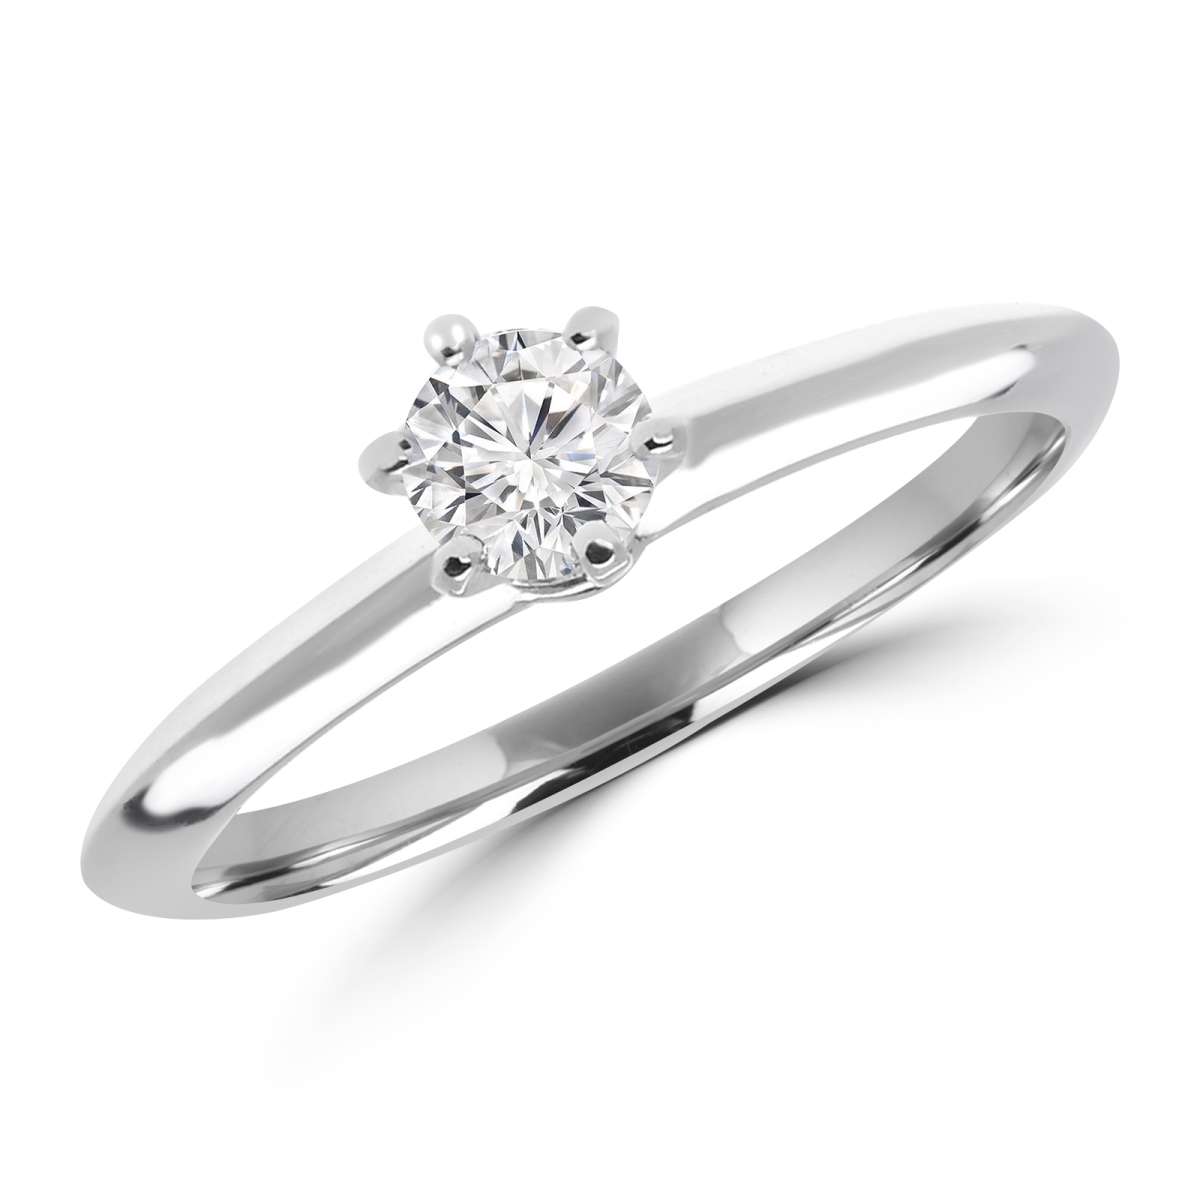 Picture of Majesty Diamonds MD170191-7.75 0.33 CT Round Diamond Solitaire Engagement Ring in 10K White Gold - Size 7.75